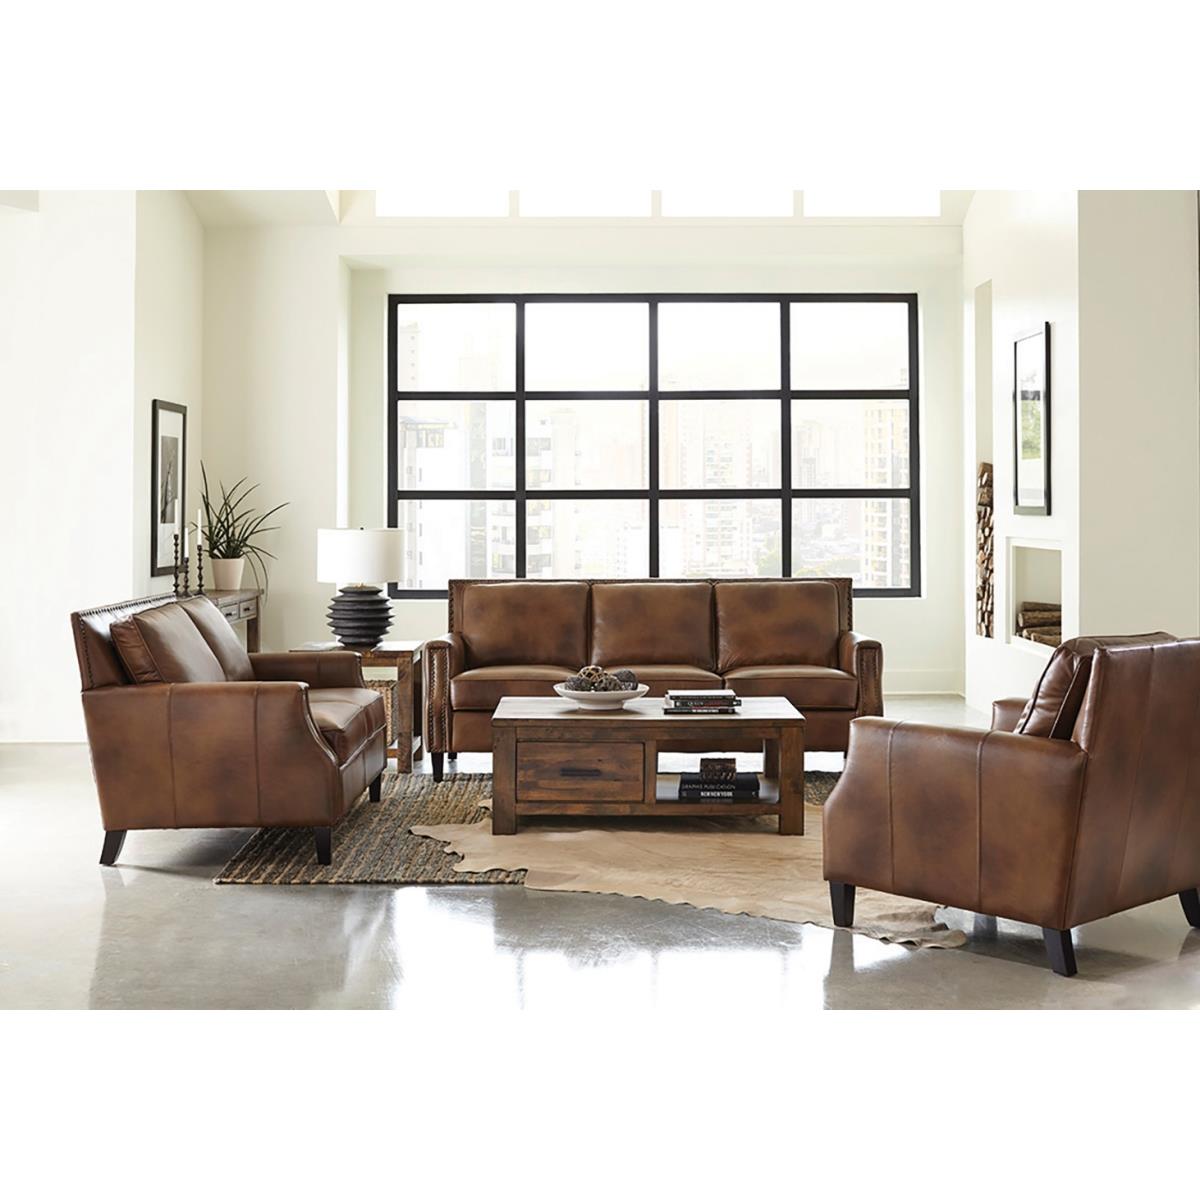 Picture of Coaster Furniture 509441-S3 Leaton Recessed Arms Living Room Set, Brown Sugar - 3 Piece